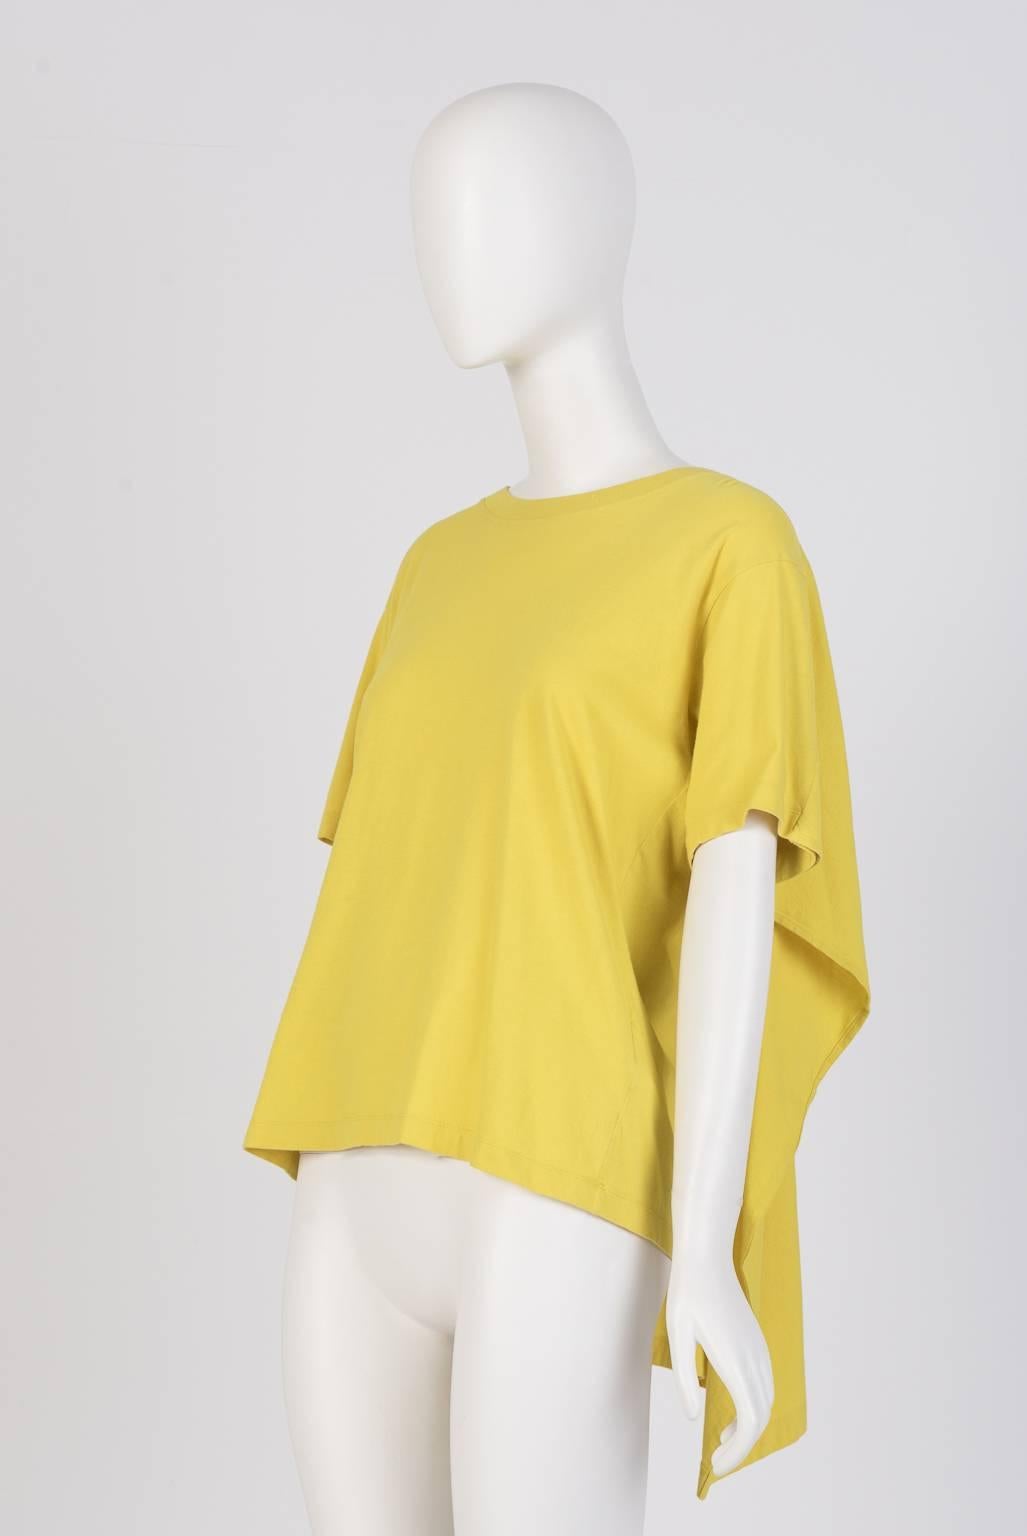 From Margiela era, this Maison Martin Margiela lime yellow T-shirt features an extra layer design, attached to the back panel of the t-shirt which looks like a cape. Could be worn back to front. 